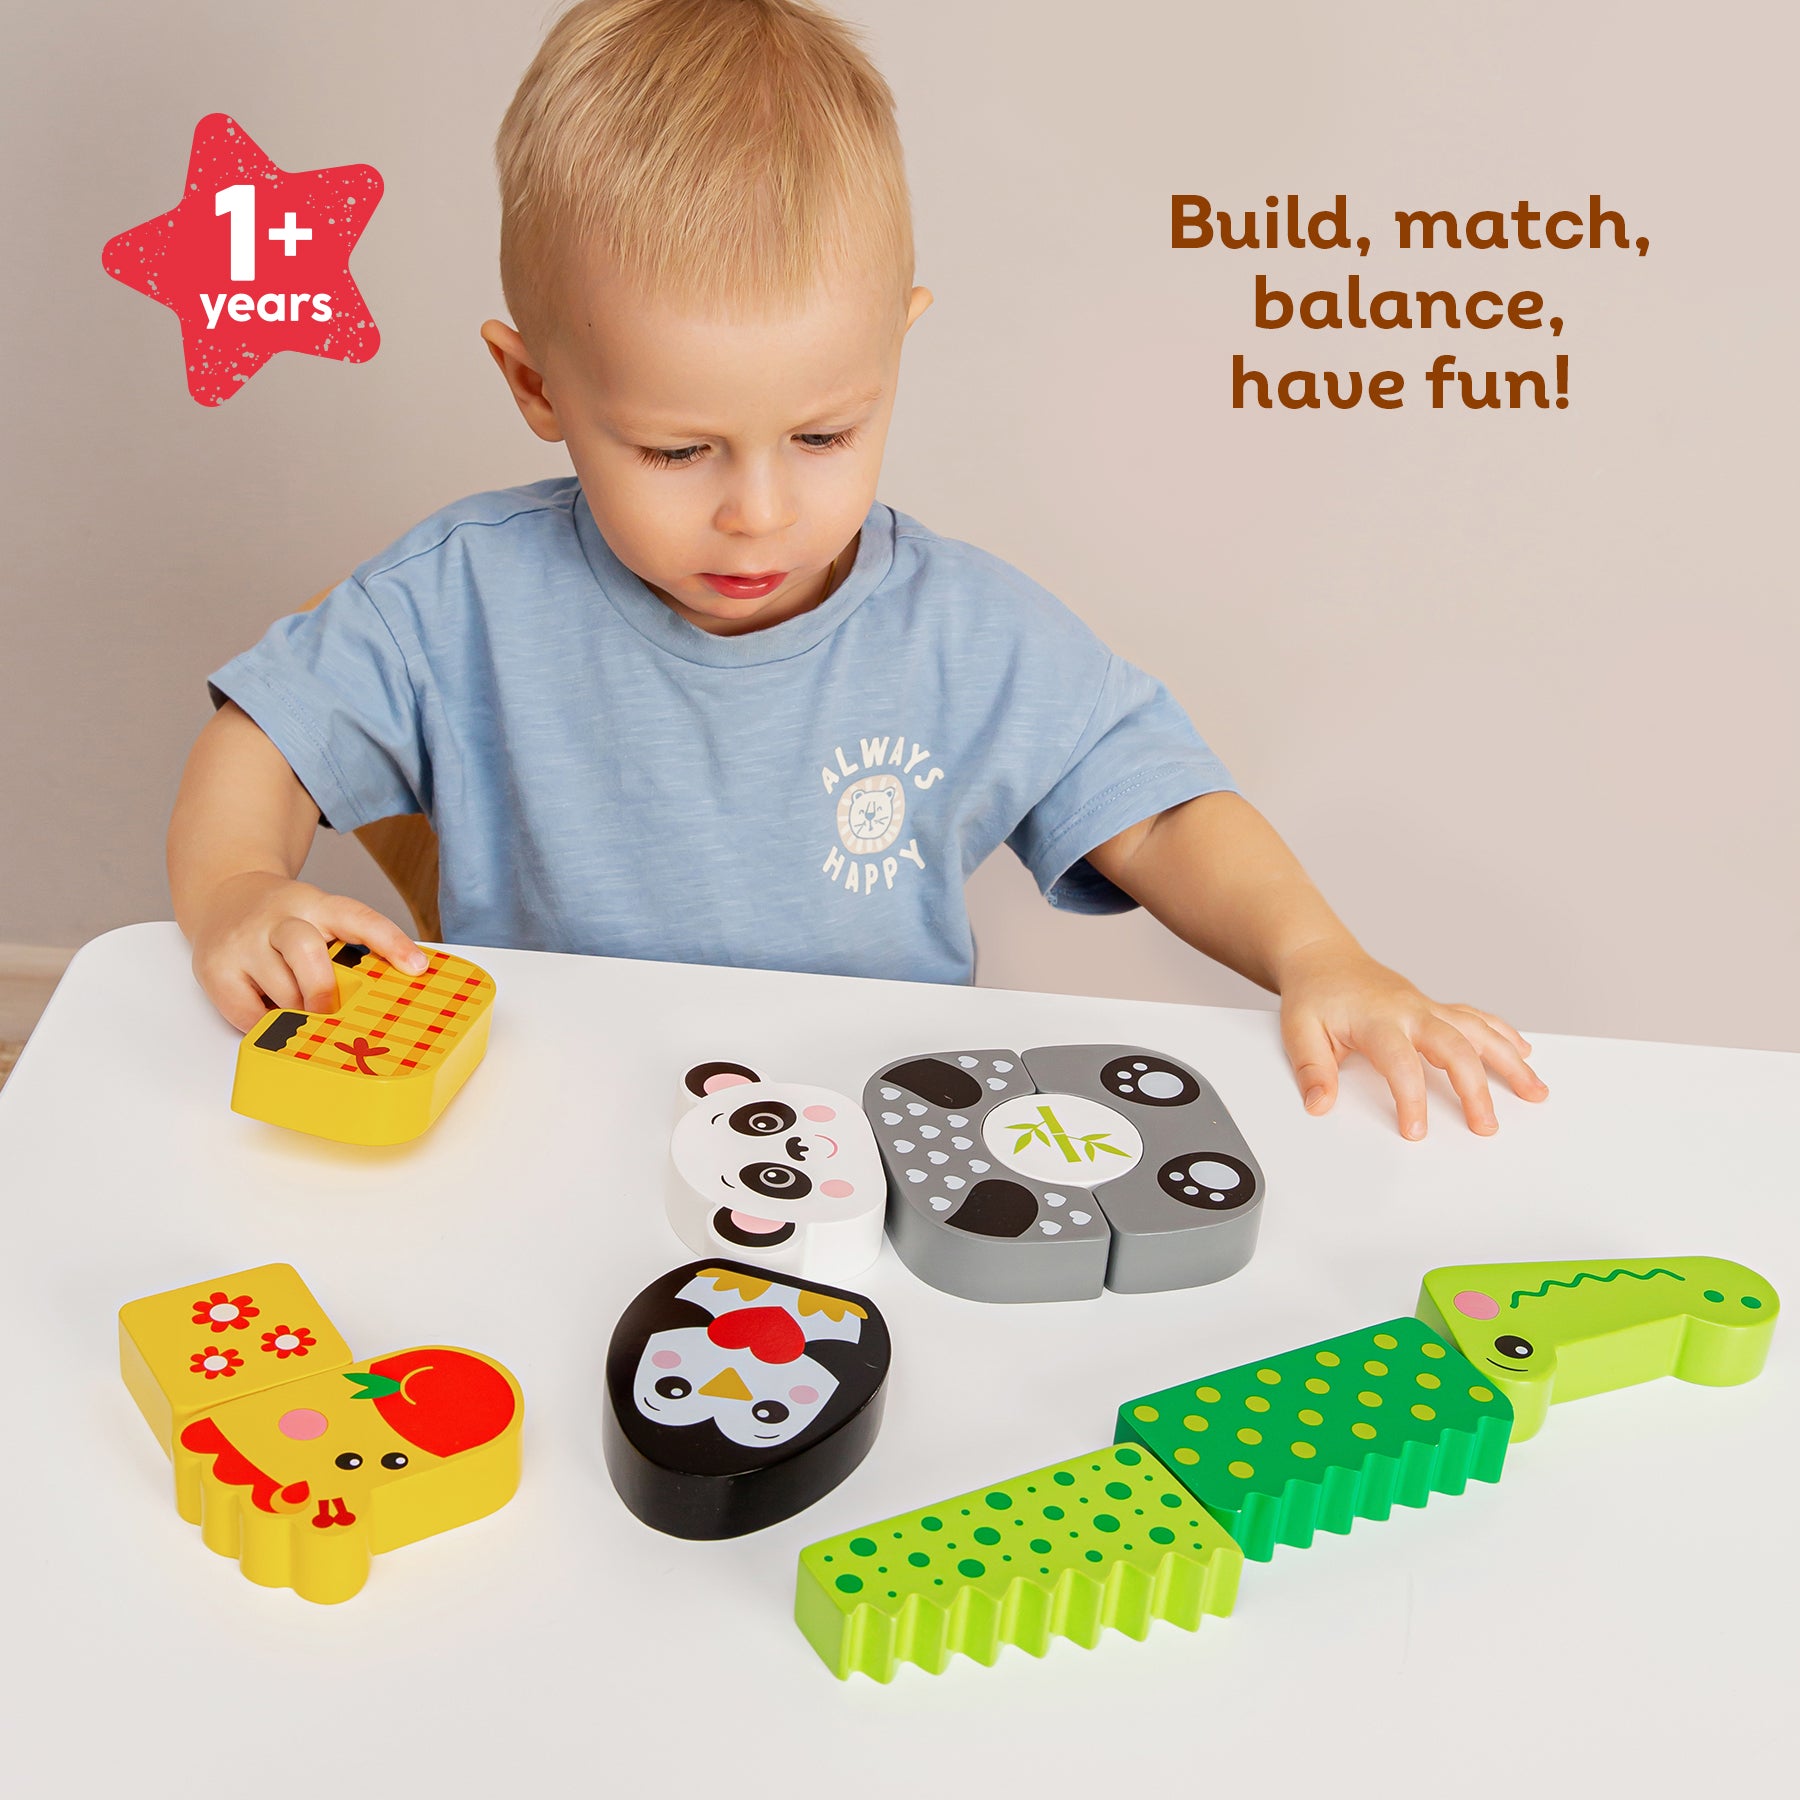 Kids Hits: Build Your Own Adventure with the Wooden Blocks Panda and Friends!